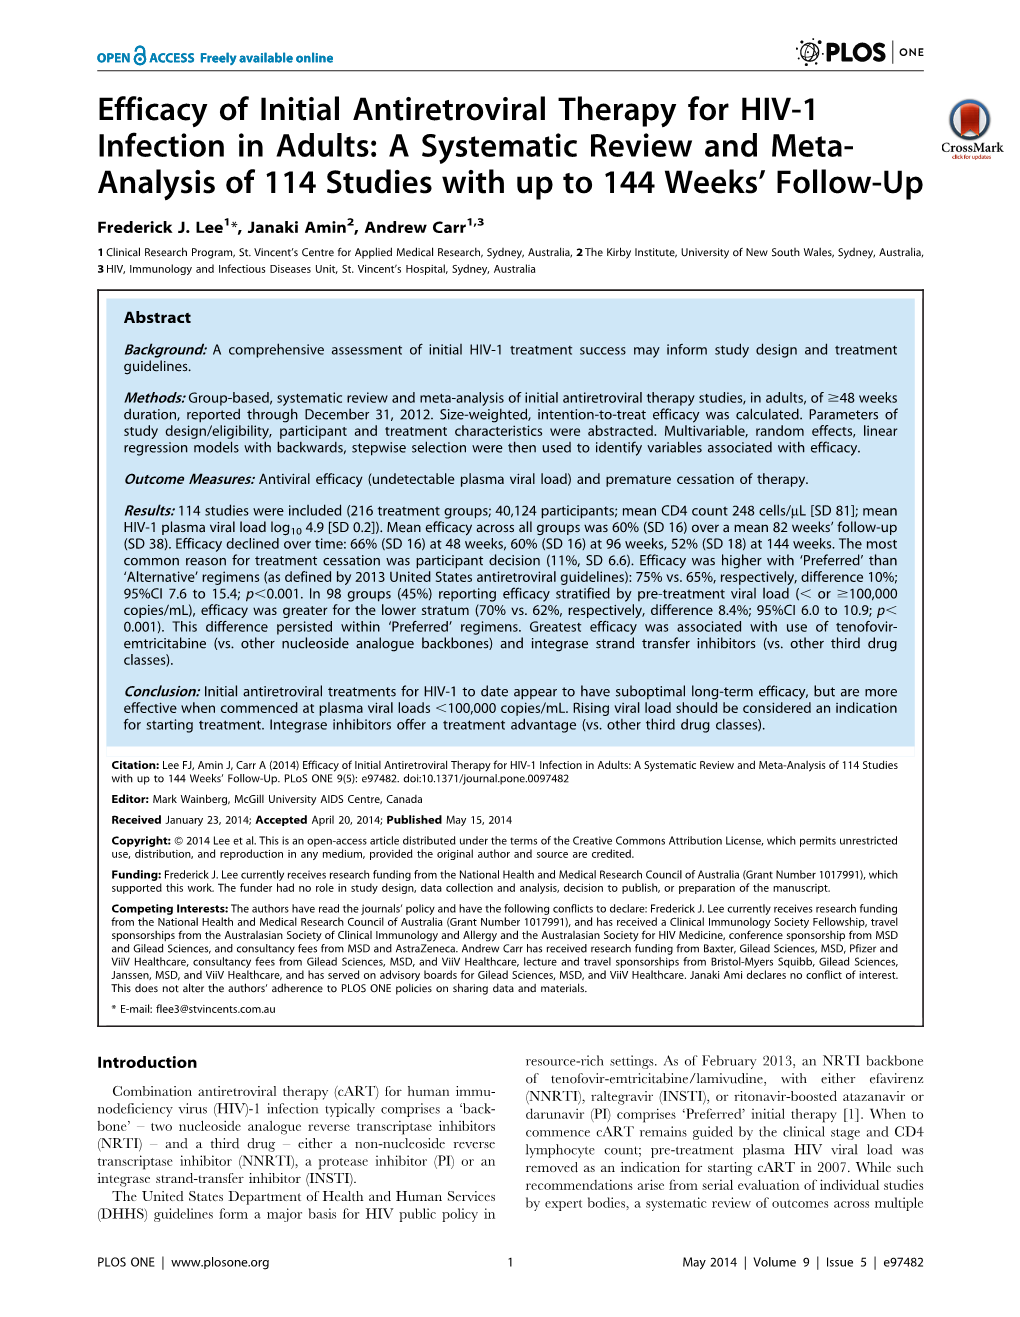 Efficacy of Initial Antiretroviral Therapy for HIV-1 Infection in Adults: a Systematic Review and Meta- Analysis of 114 Studies with up to 144 Weeks’ Follow-Up